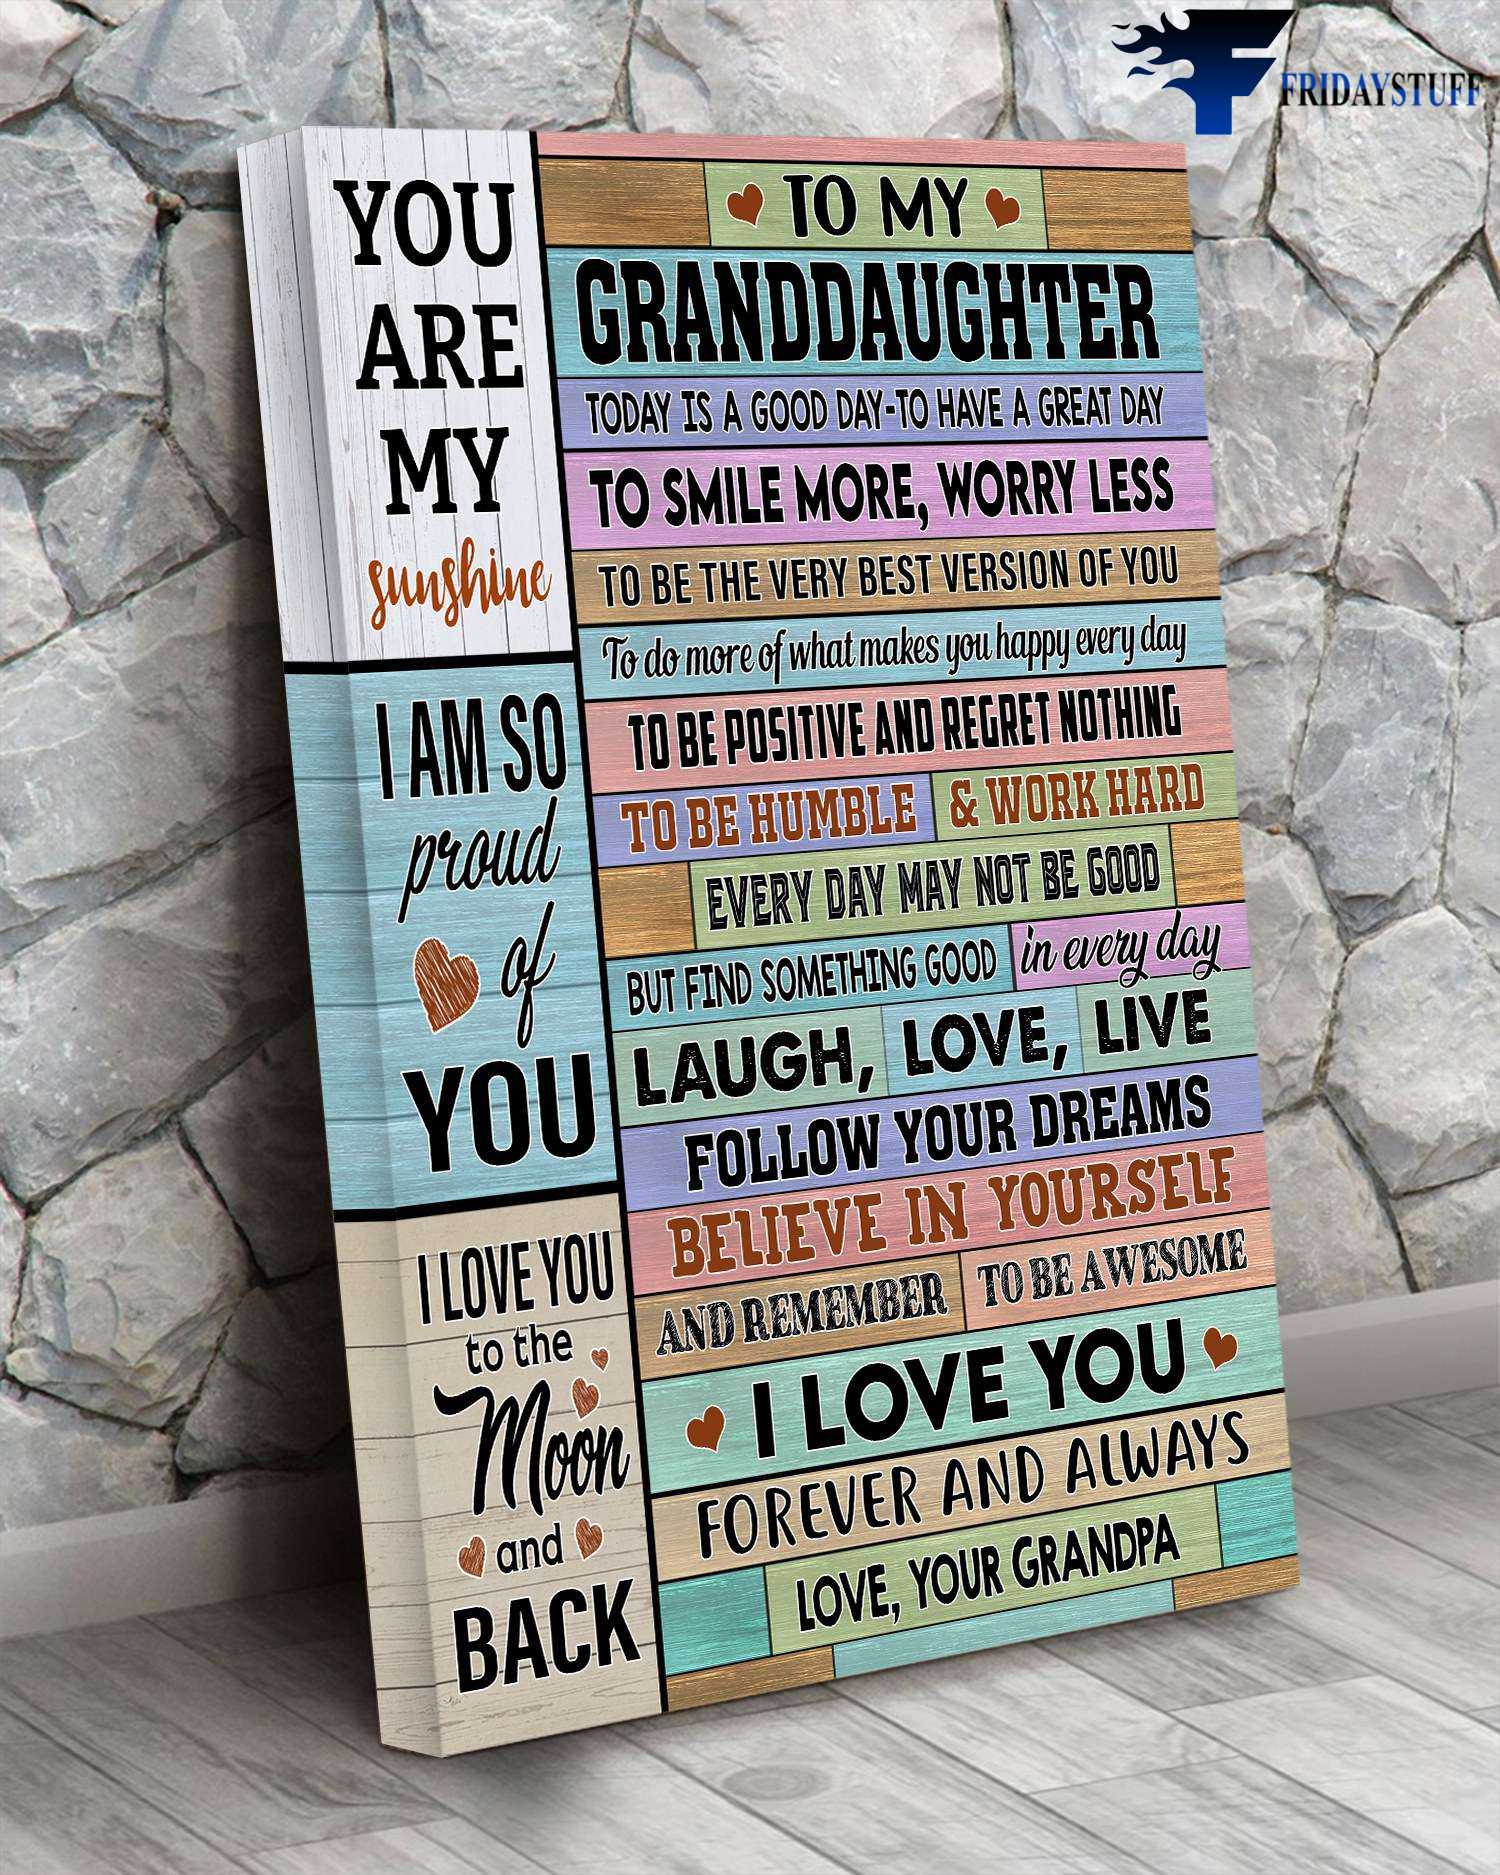 Grandpa Granddaughter - To My Granddaughter, Today Is A Good Day, To Have A Great Day, To Smile More, Worry Less, To Be The Very Best Version Of You, You Are My Sunshine, I Am So Pround Of You, I Love You To The Moon And Back